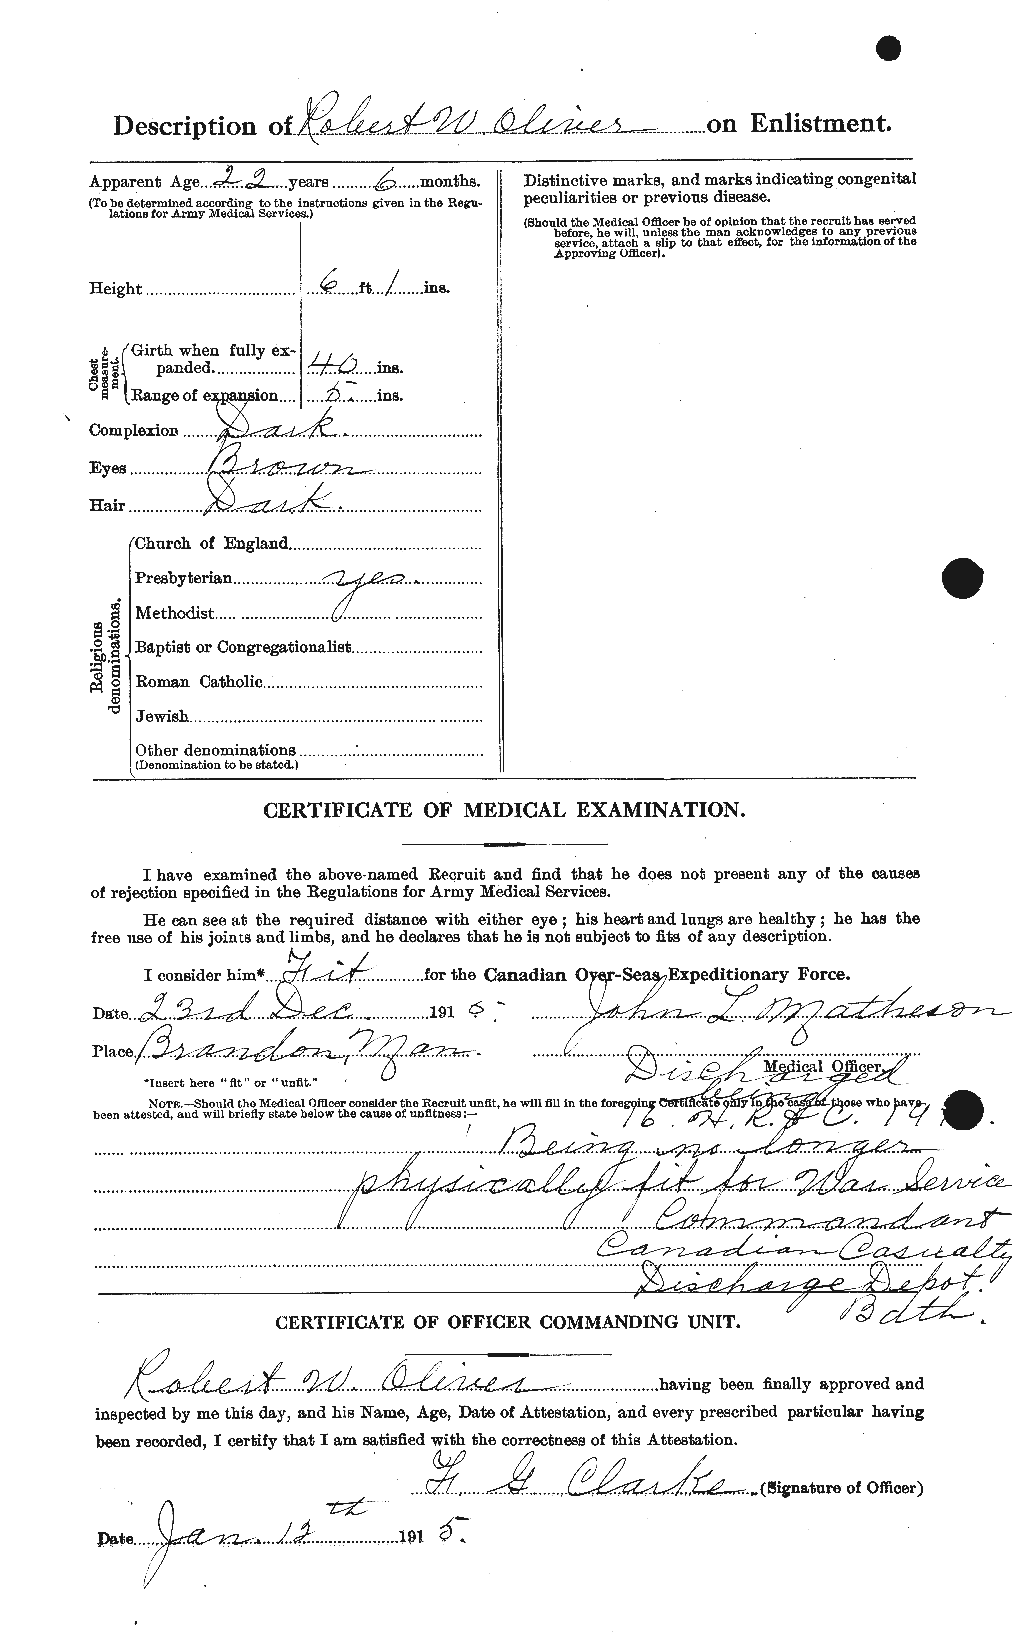 Personnel Records of the First World War - CEF 555492b